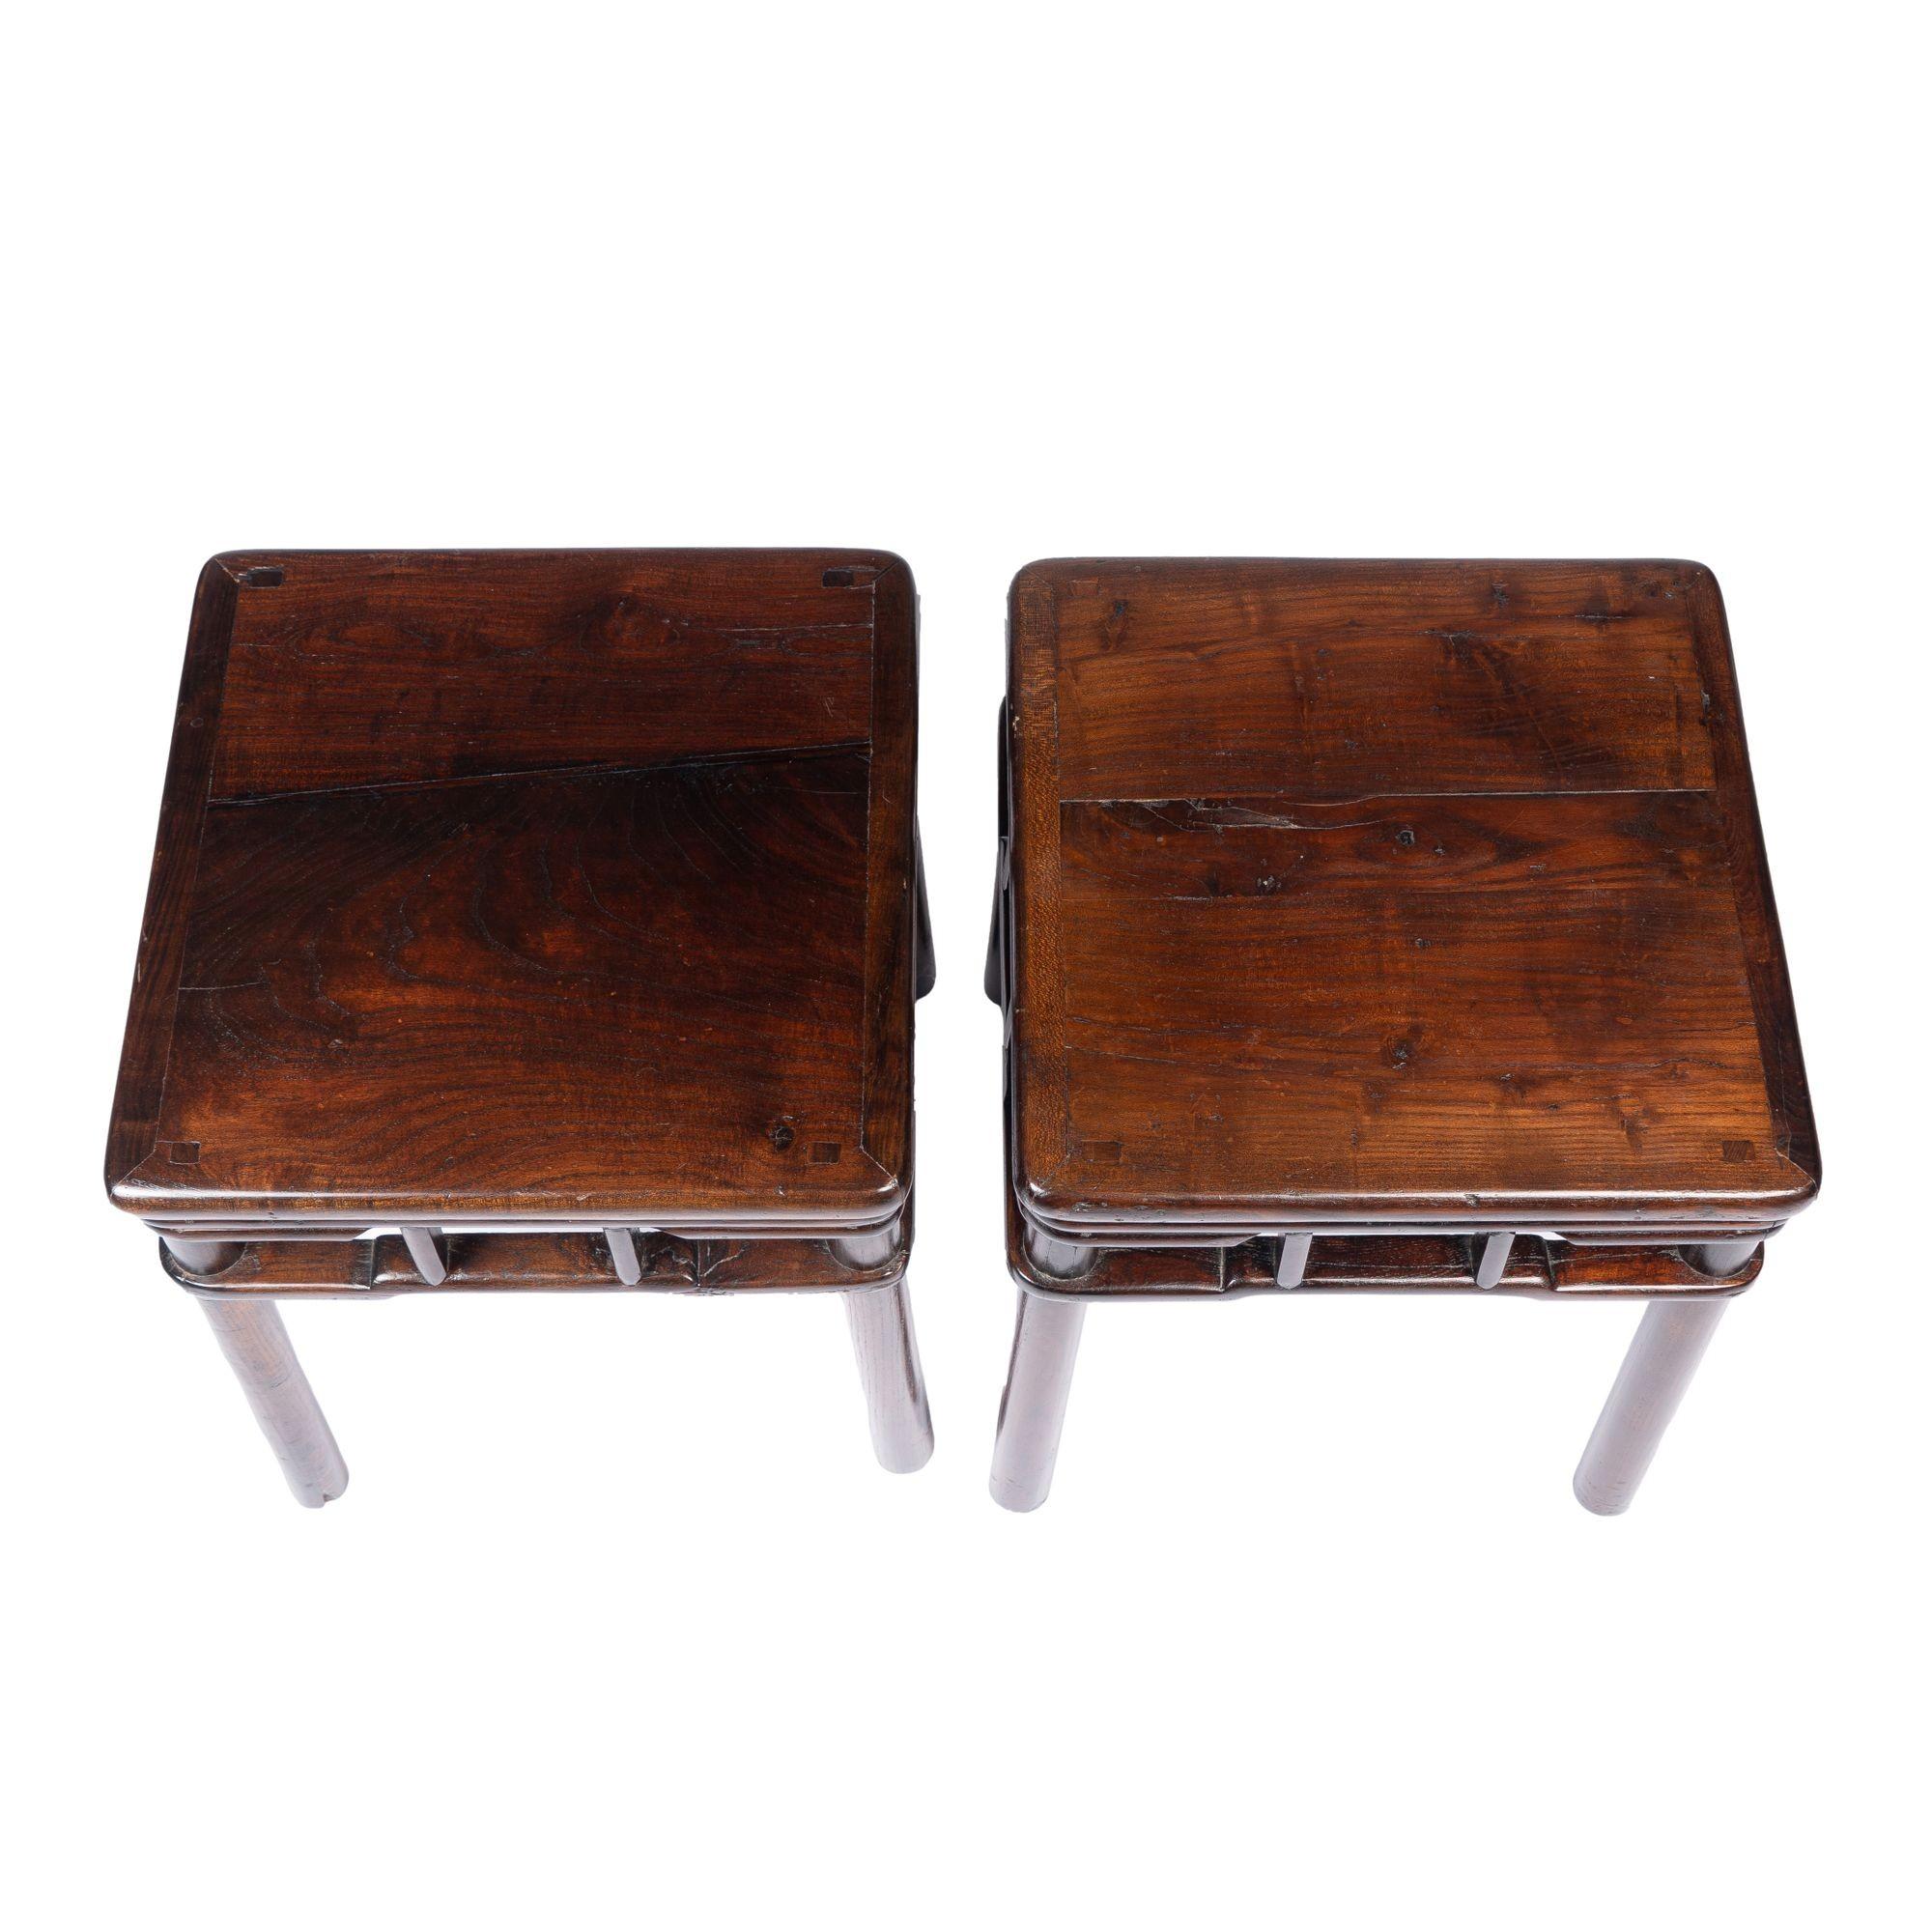 Pair of Chinese Elm Stools with Hump Back Rail, 1780-1820 For Sale 6